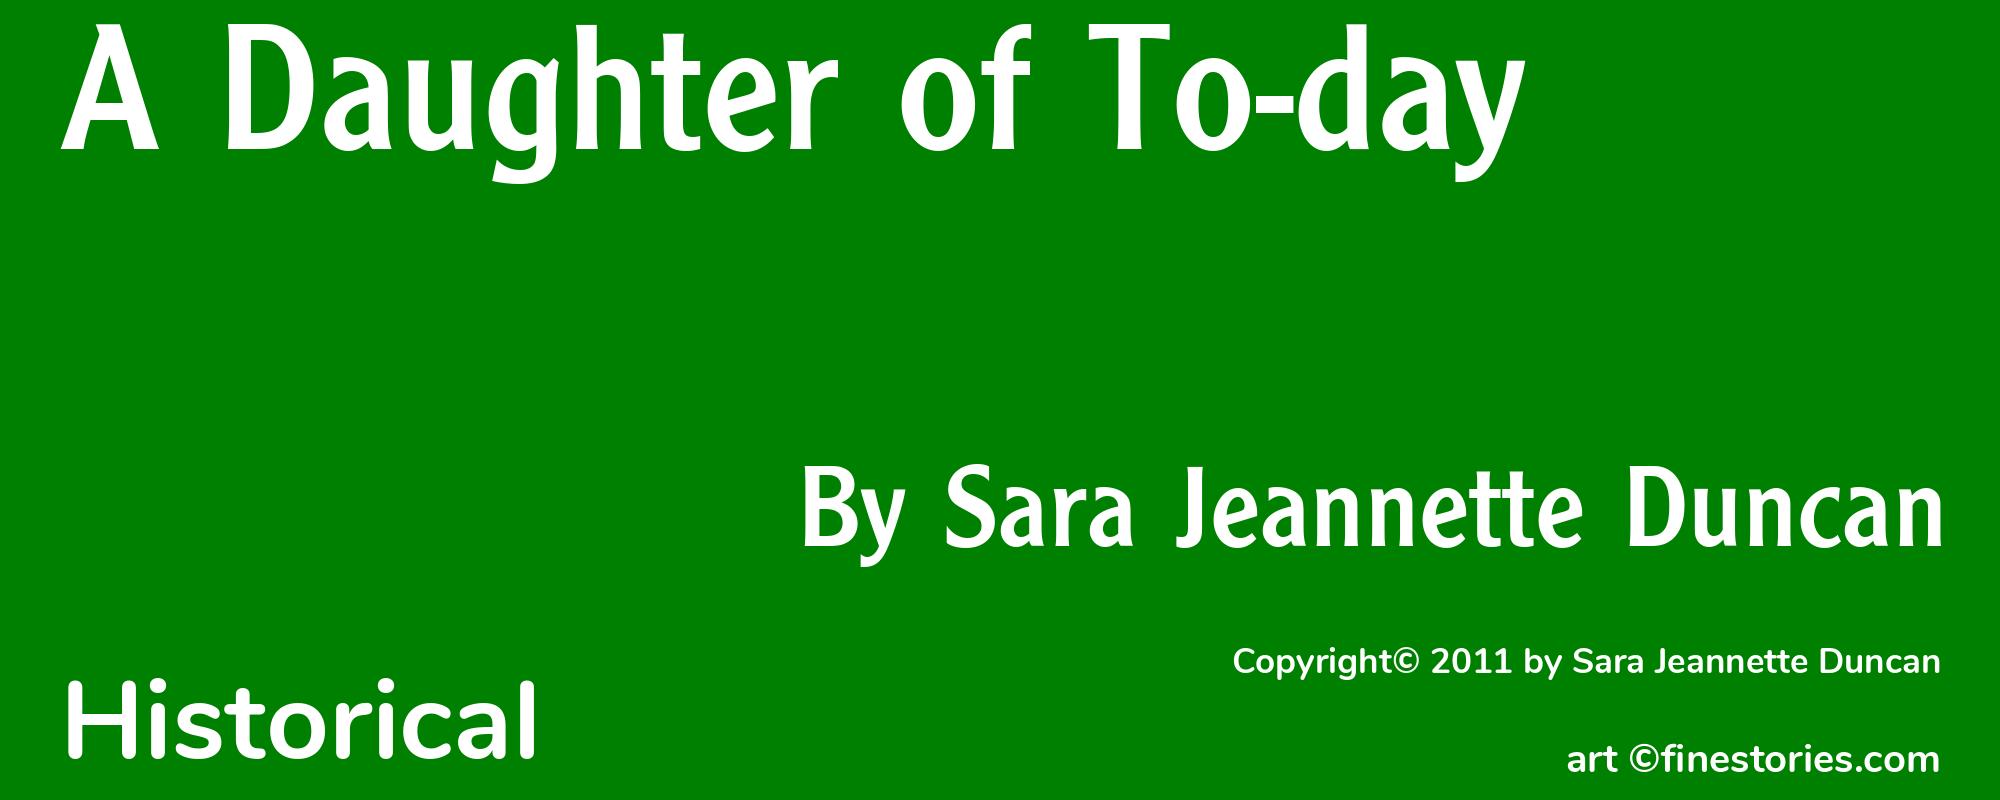 A Daughter of To-day - Cover